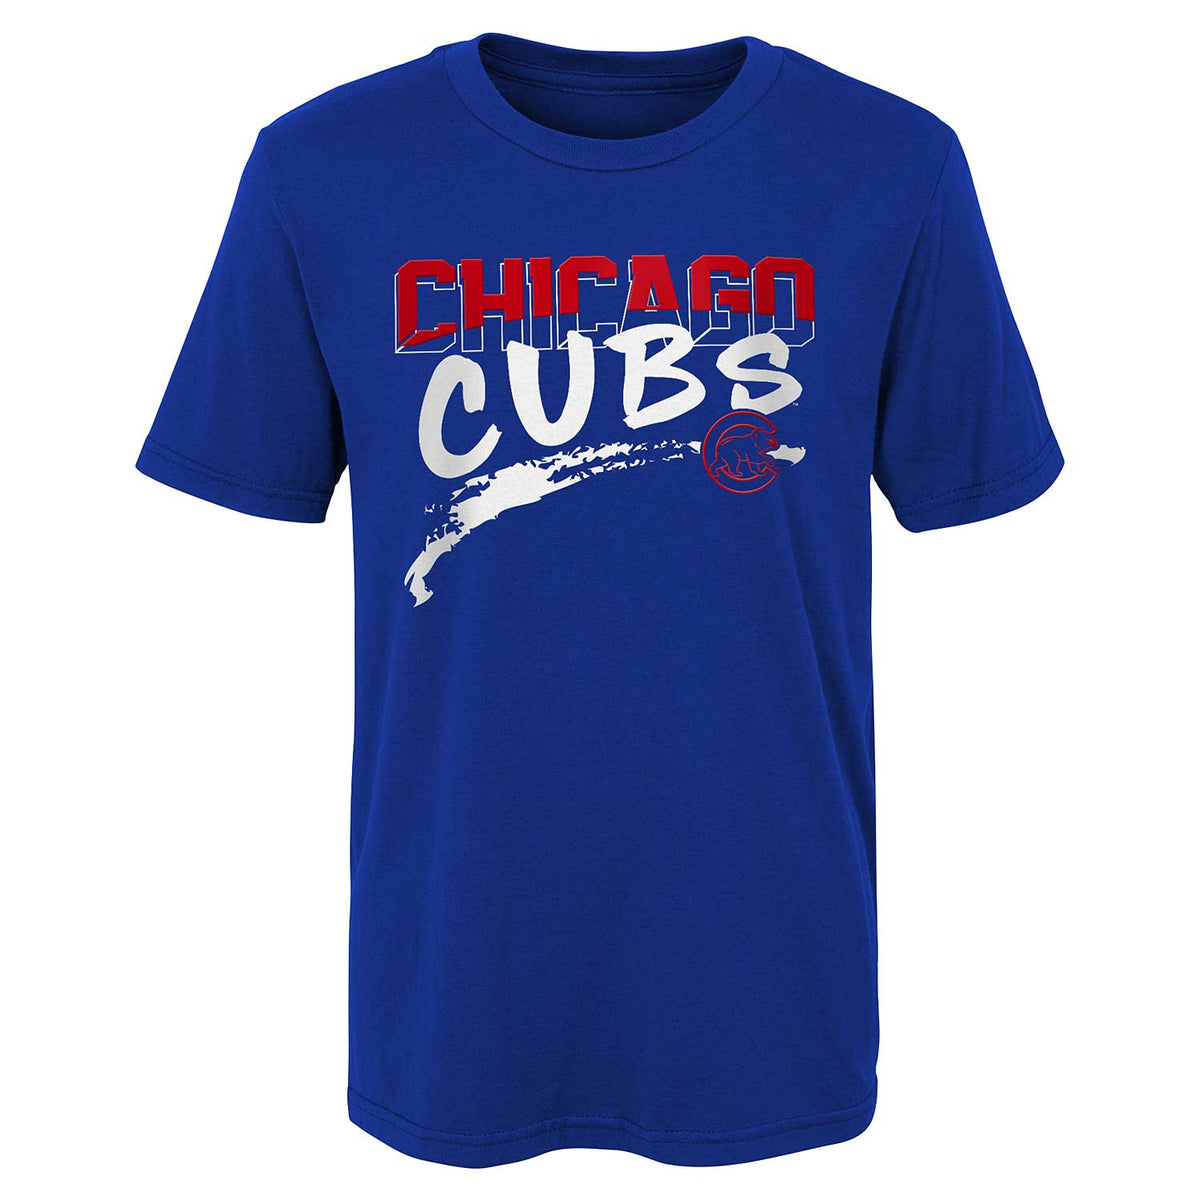 Chicago Cubs Youth Vintage Classic Grey T-Shirt X-Large = 18-20